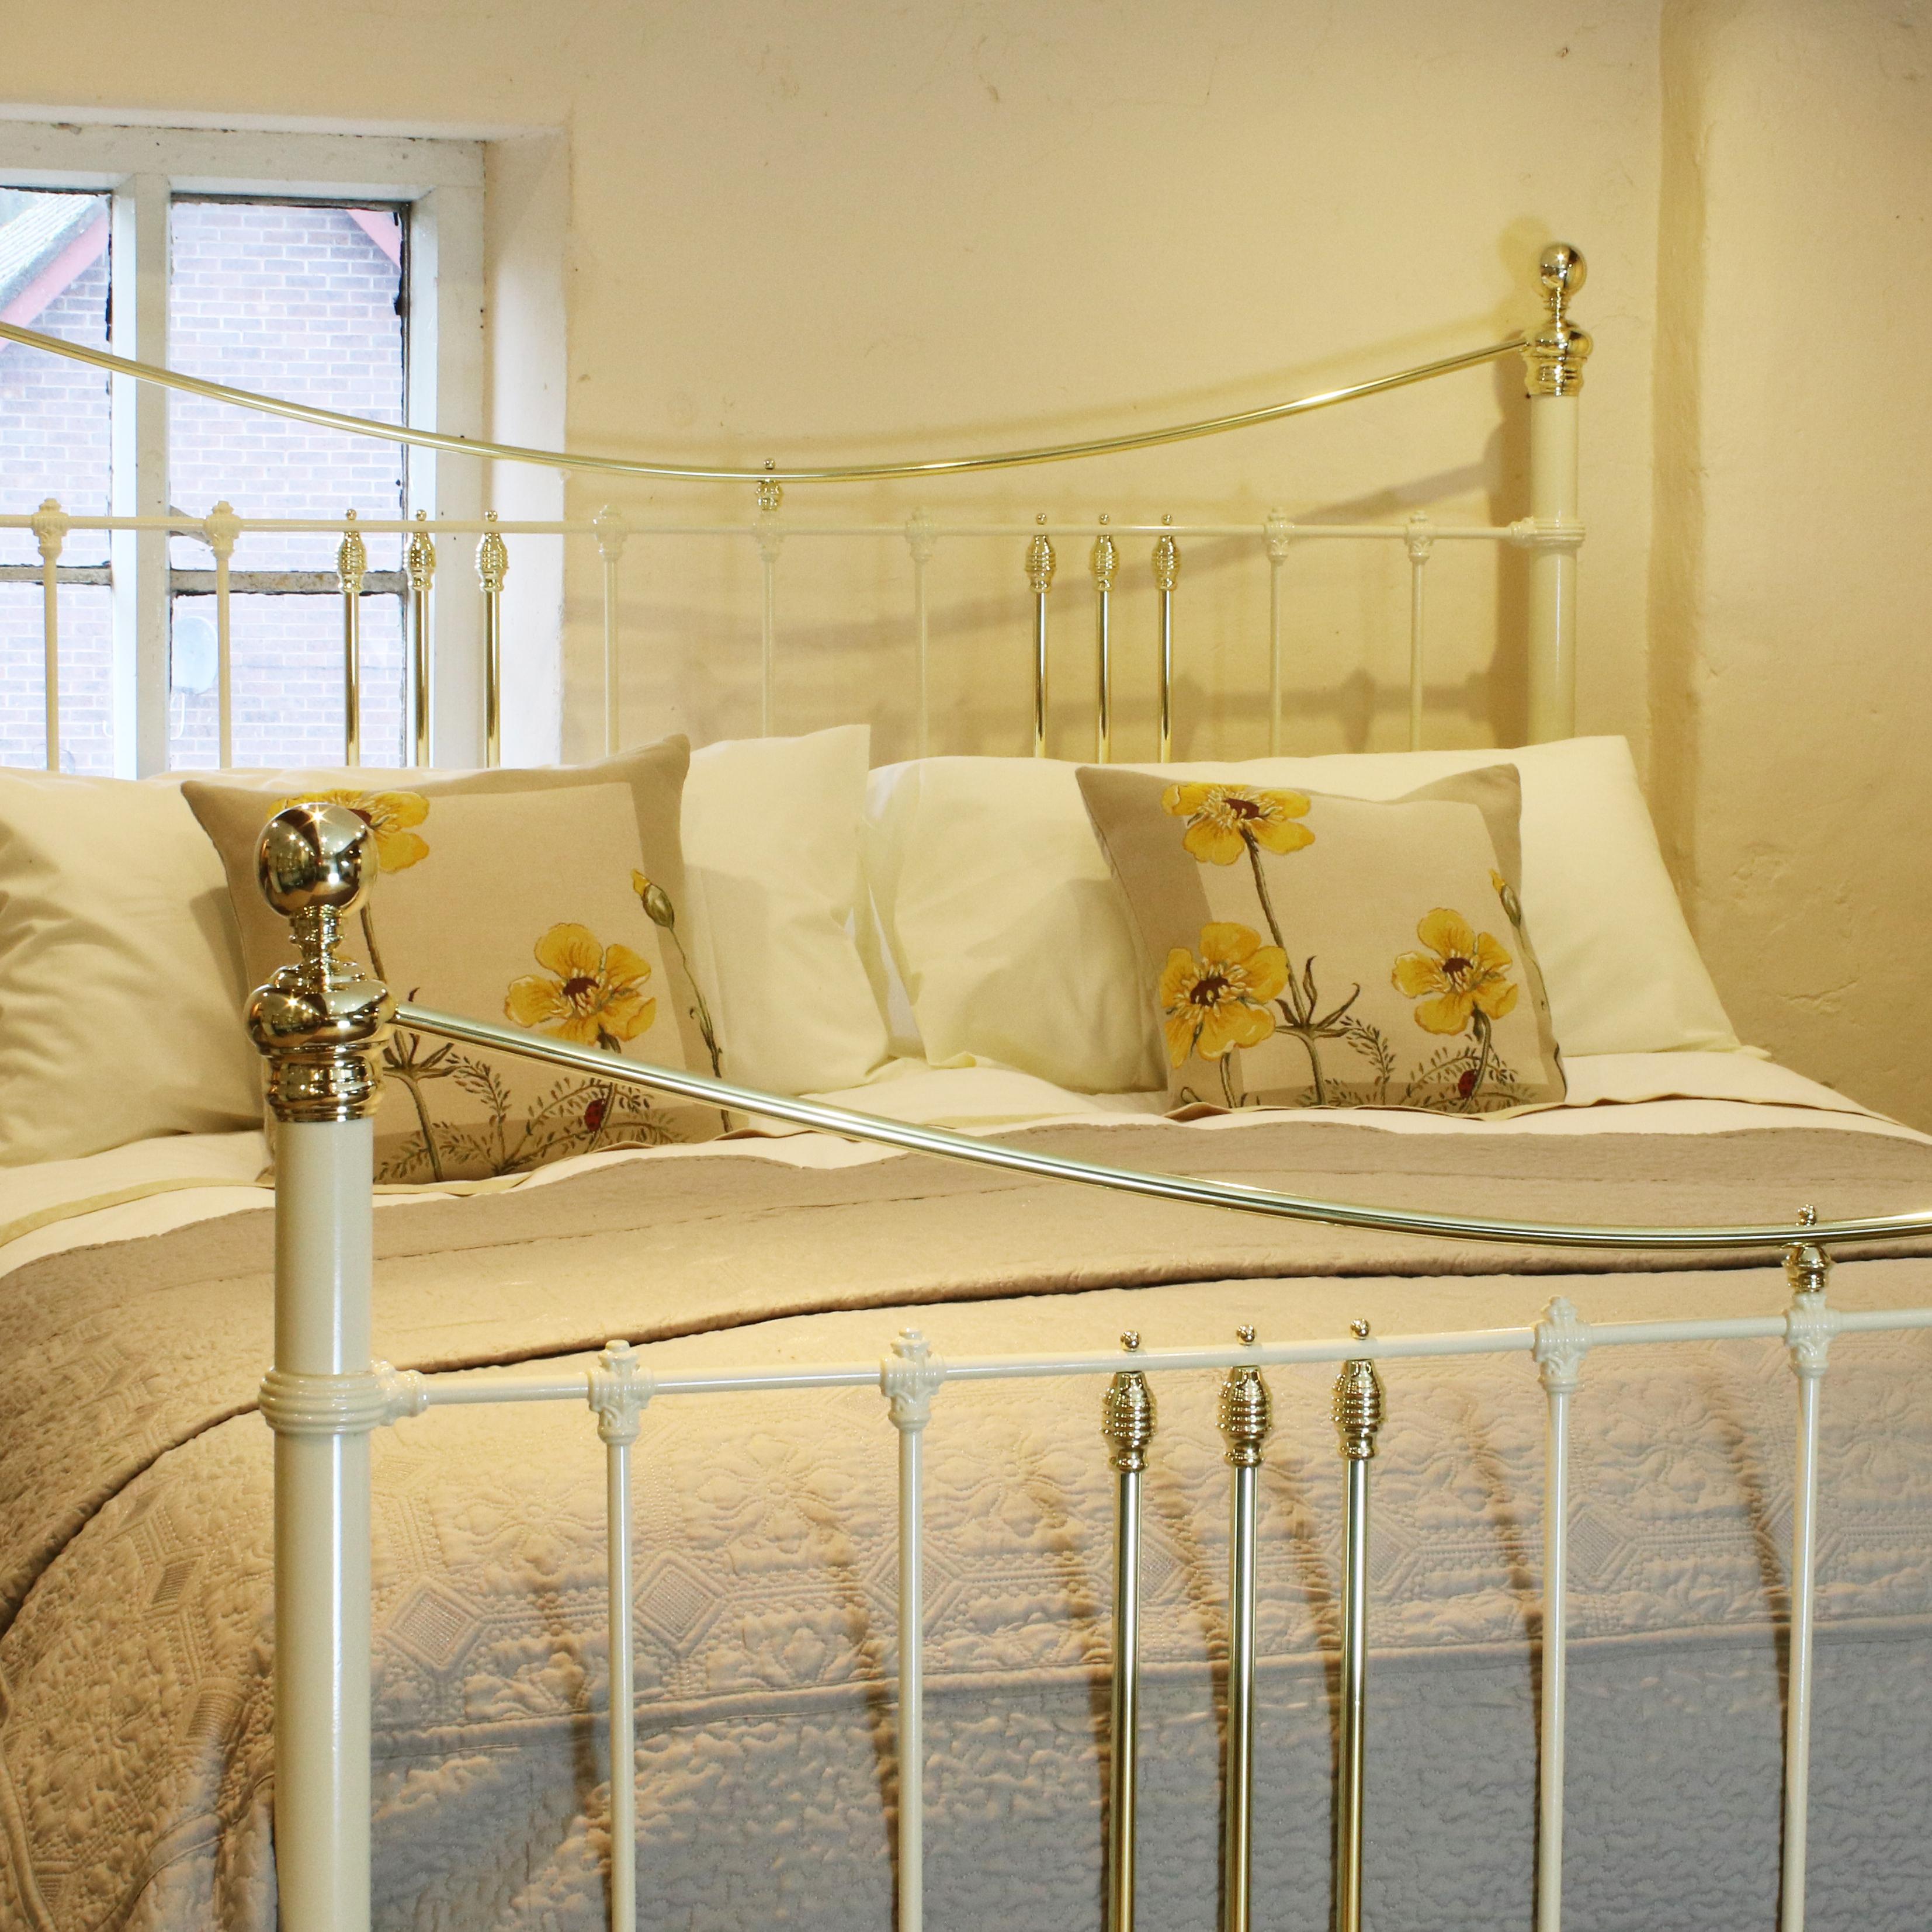 A cast iron and brass bed adapted from an original Victorian bed finished in cream, with curved brass top rails and decorative mouldings adapted from a frame. 

This bed accepts a British Super King Size or Californian King Size (6ft wide, 72 inches